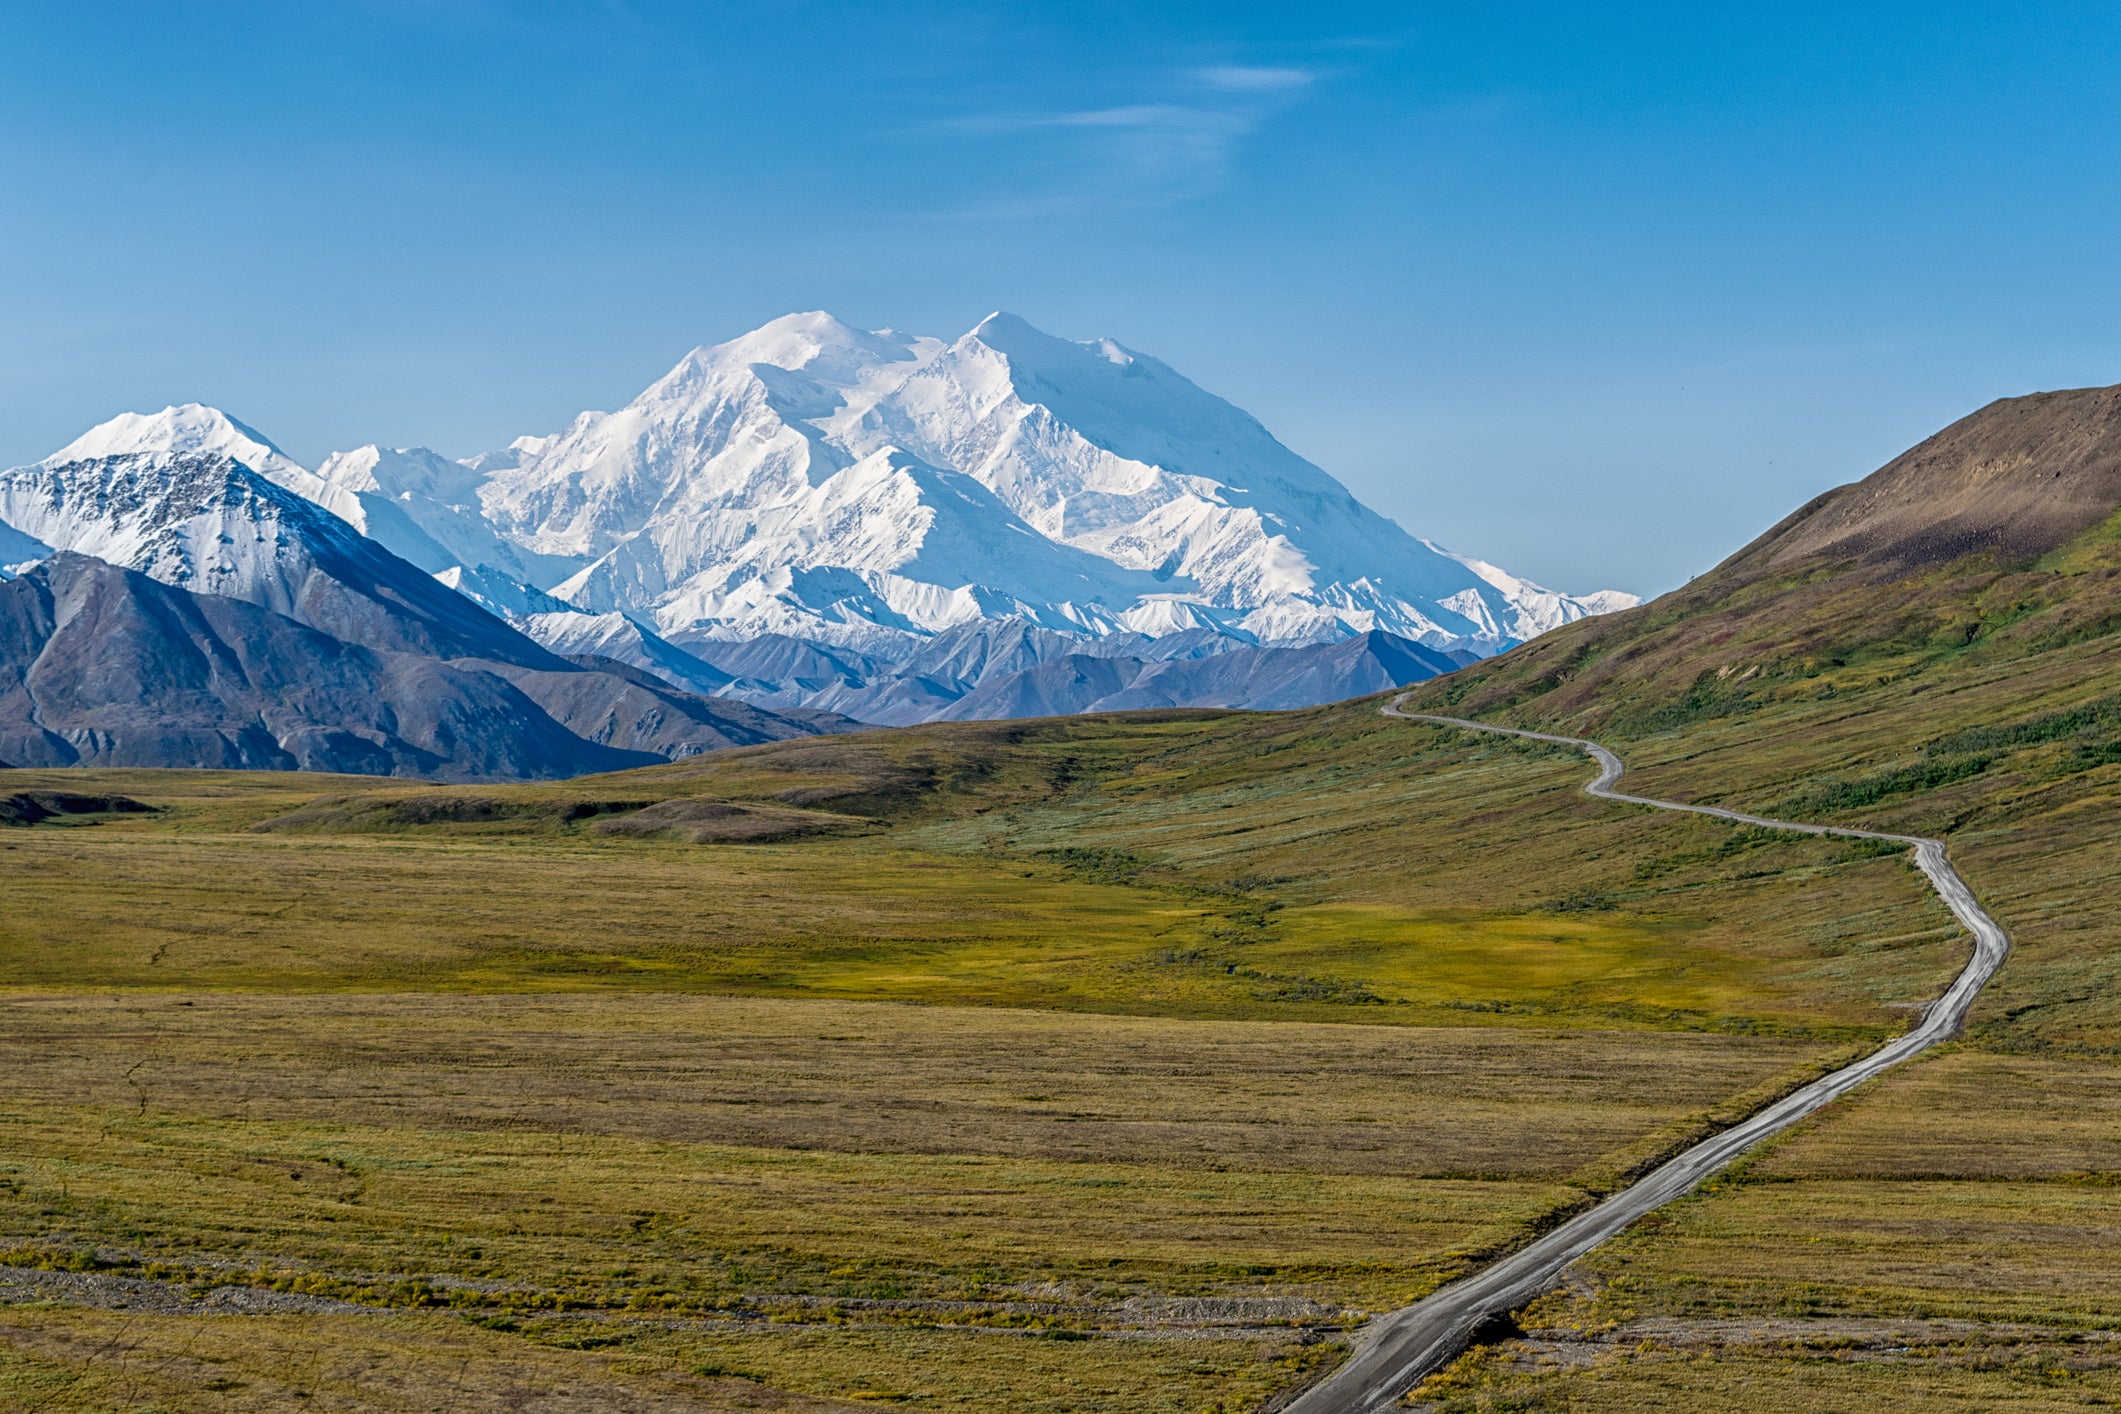 File photo: Denali is the highest mountain in the US